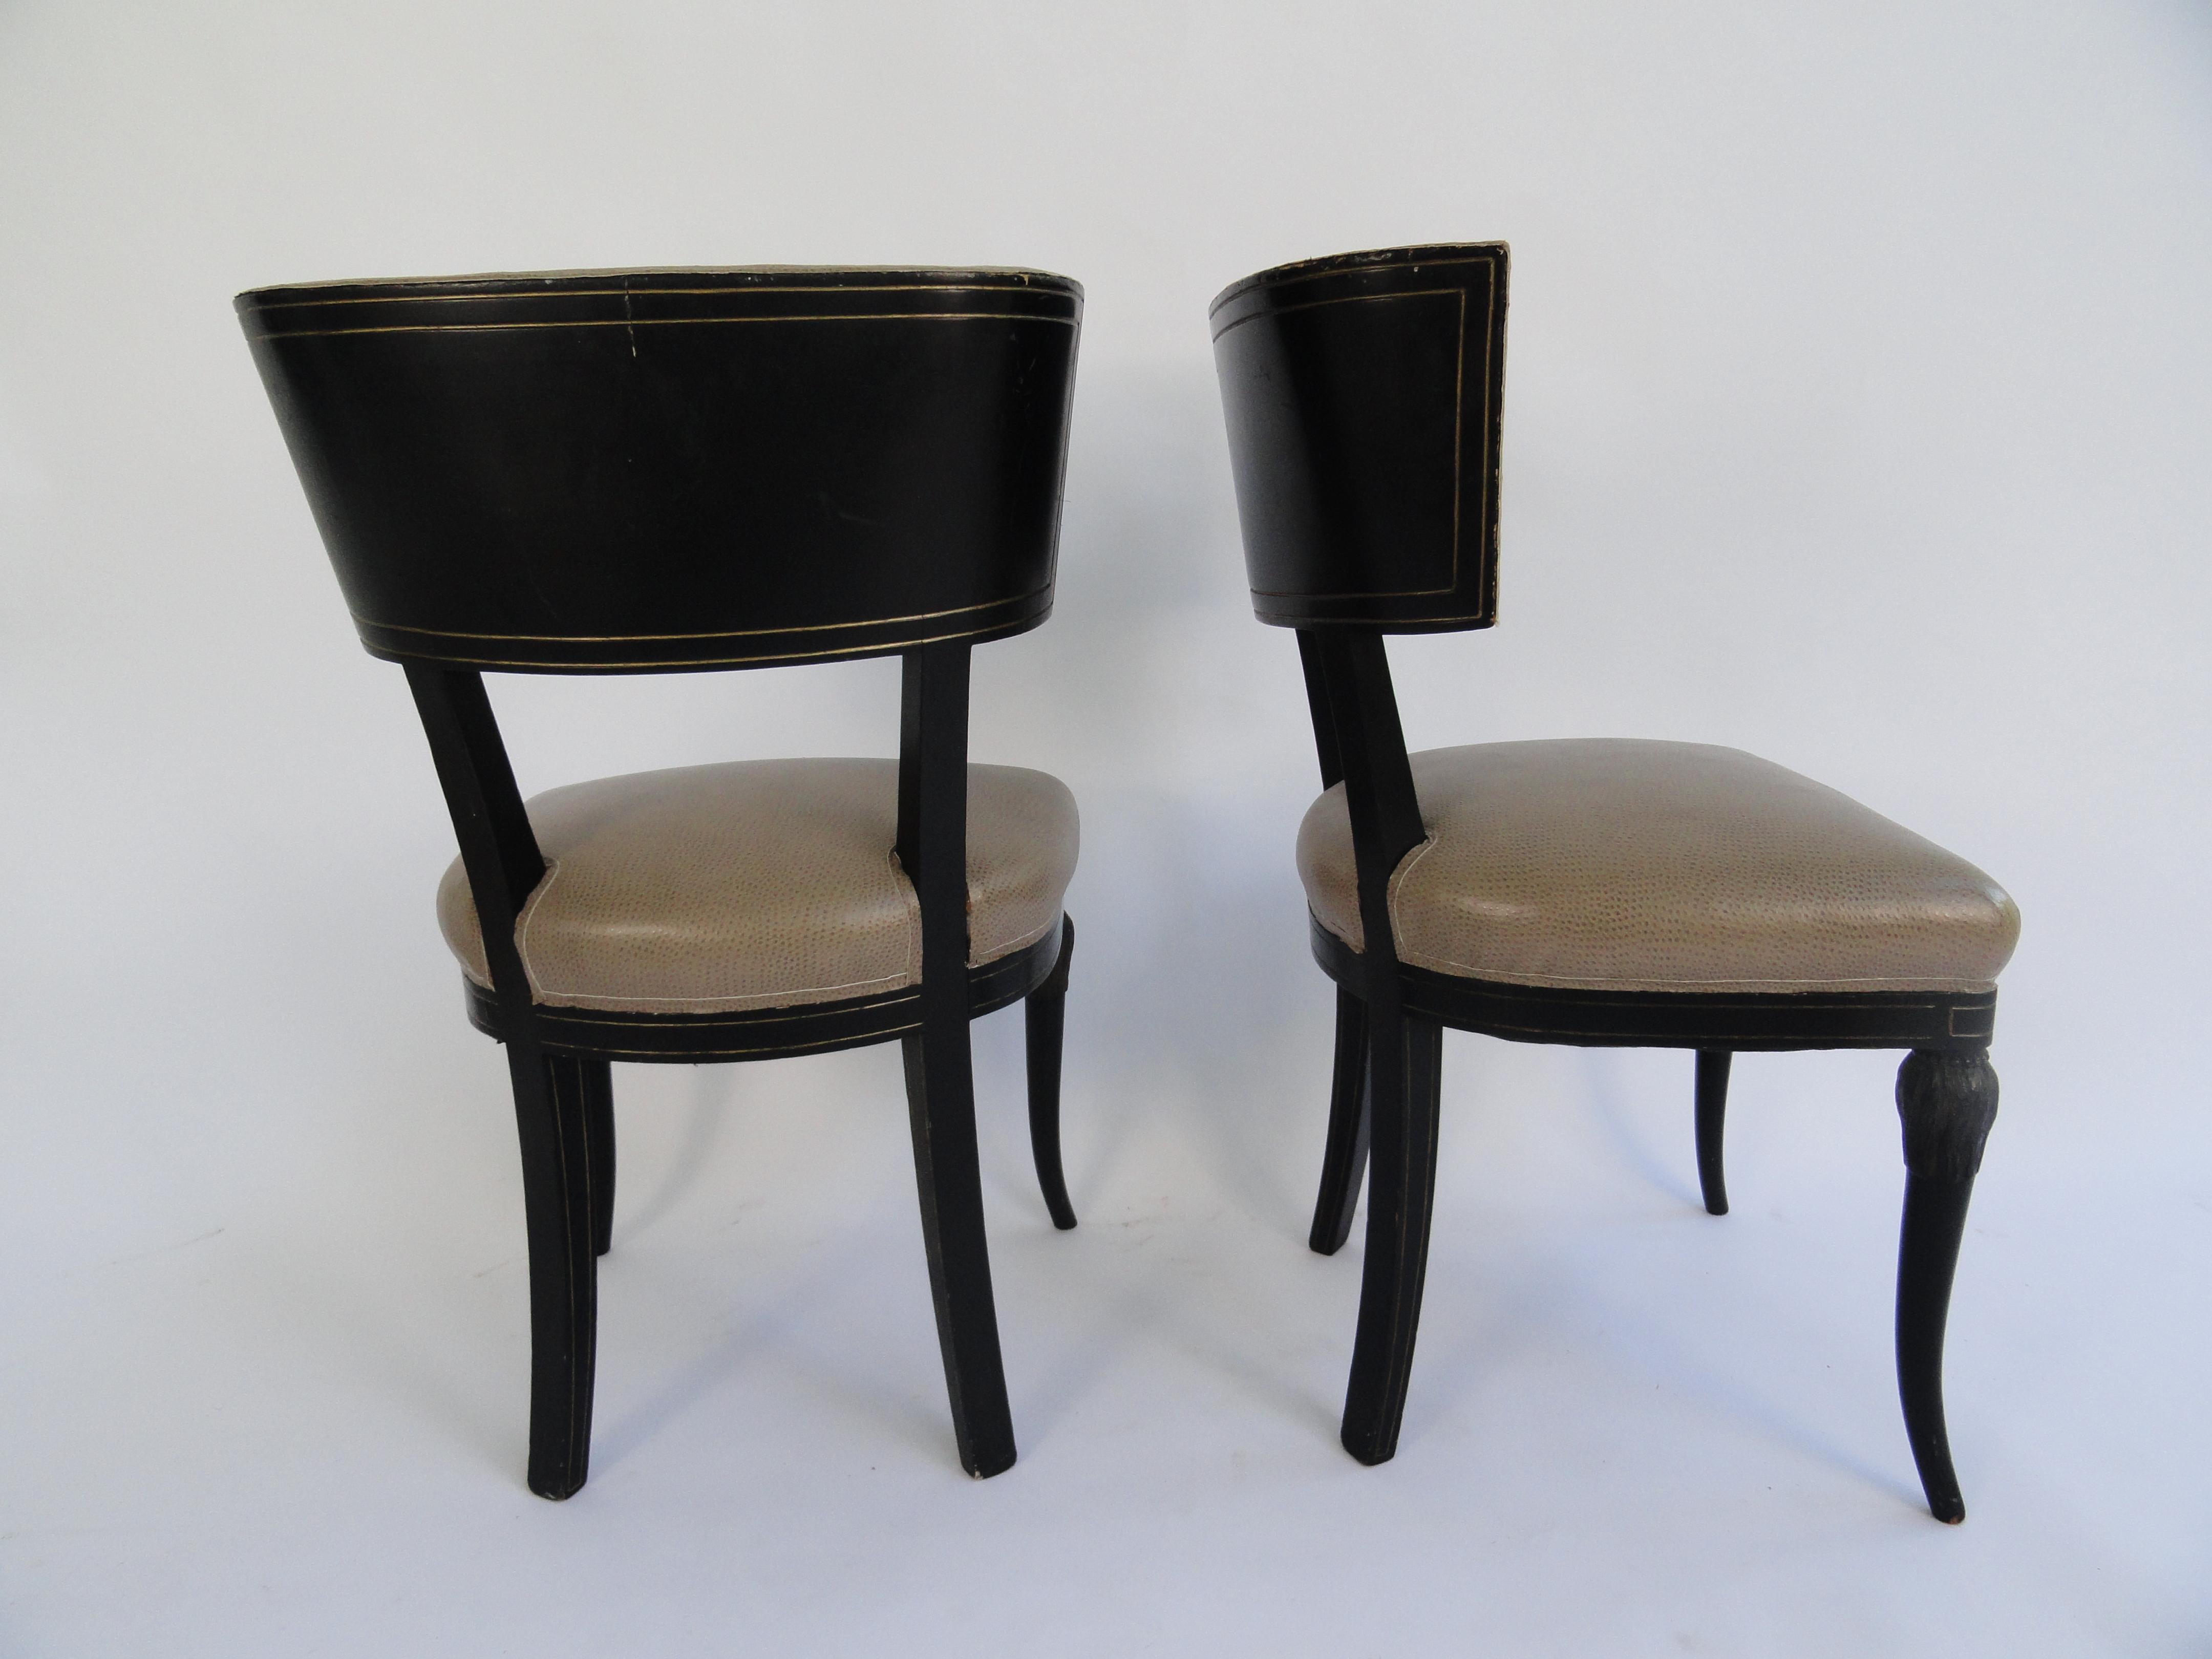 Set of four Maison Jansen side chairs with original ebony finish with gilt detail. Upholstered in faux ostrich.